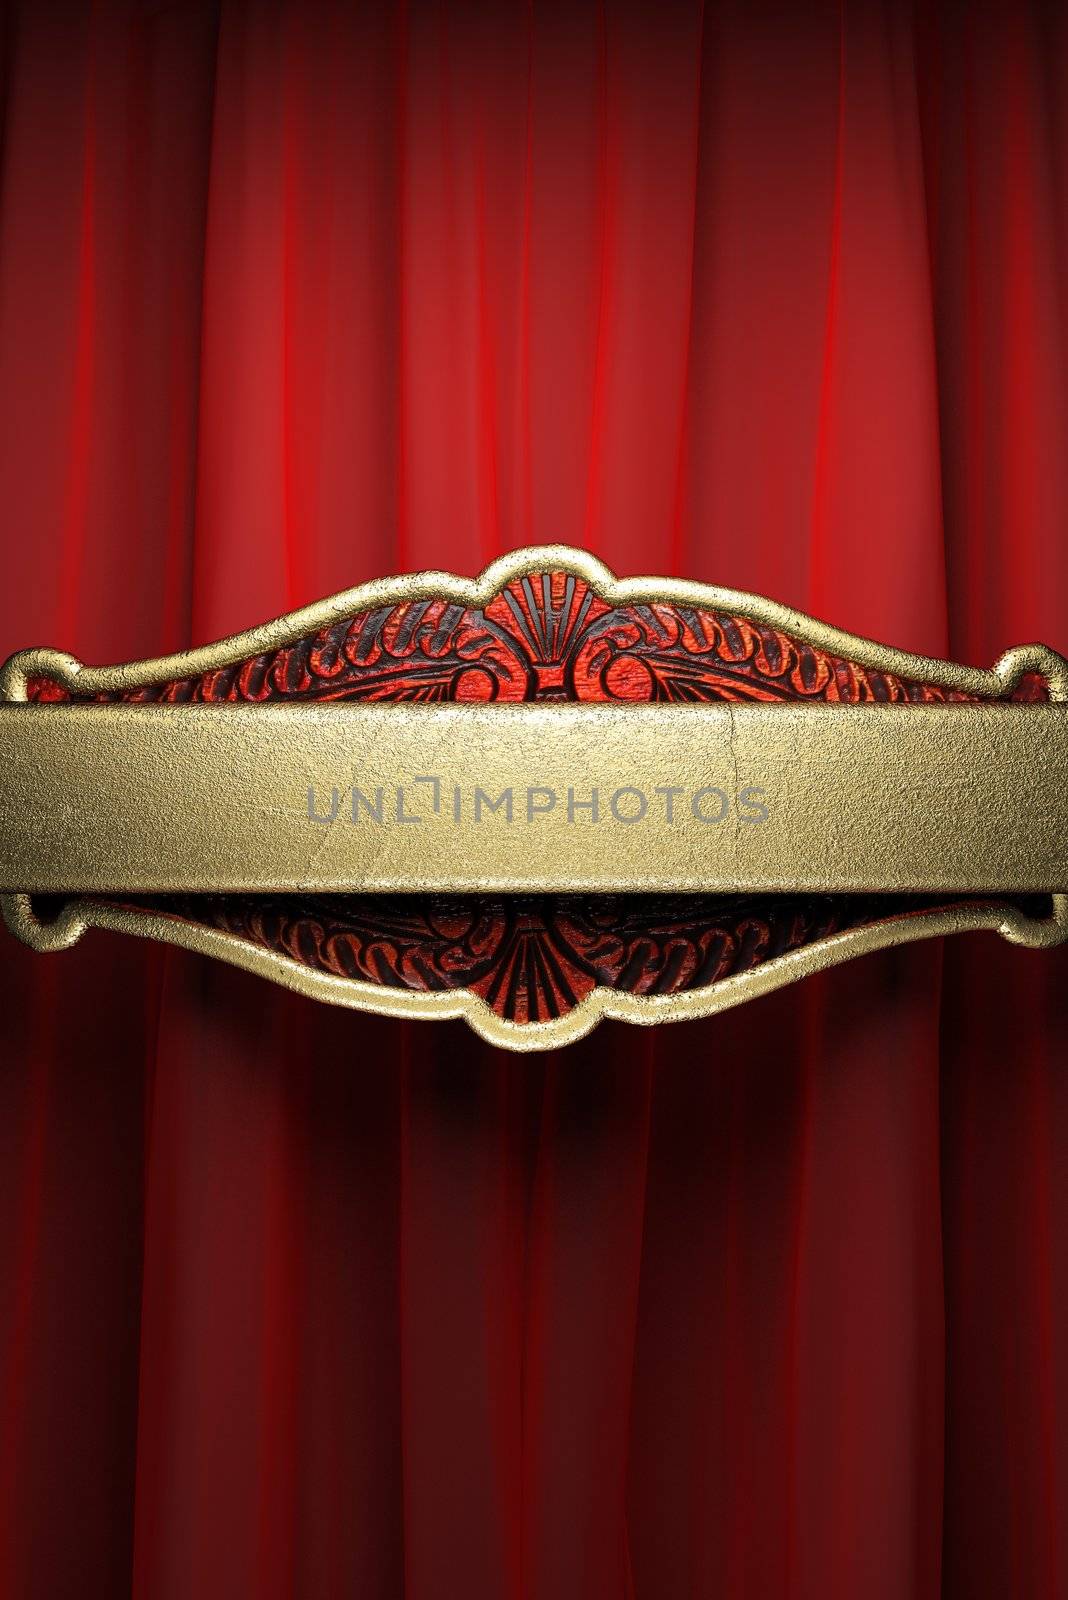 gold on red curtain by videodoctor